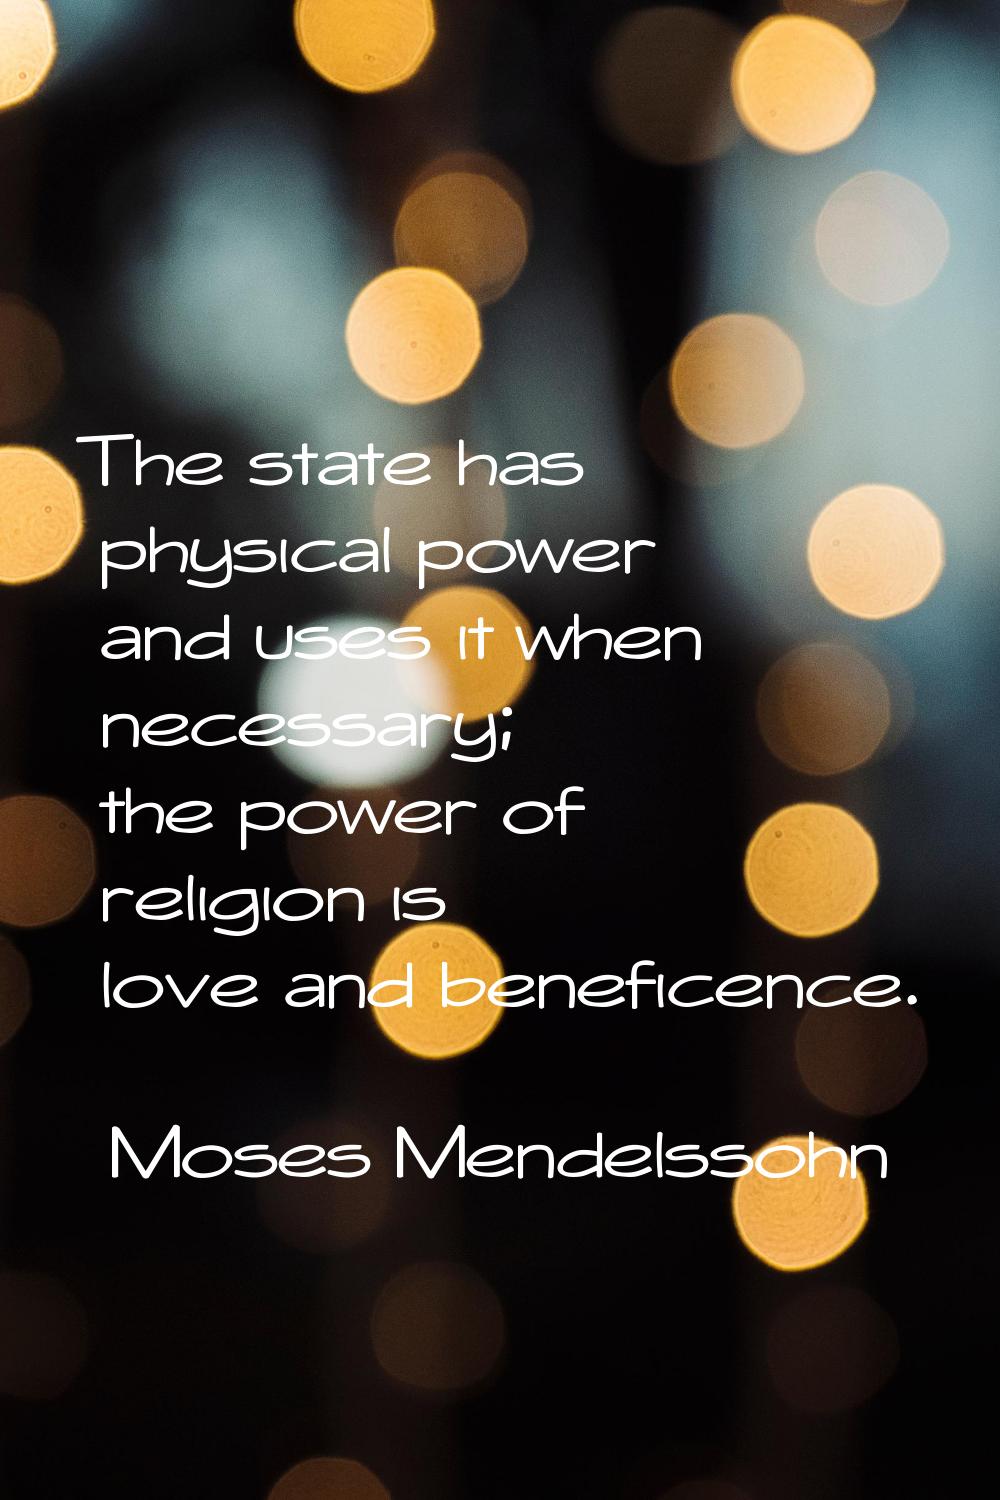 The state has physical power and uses it when necessary; the power of religion is love and benefice